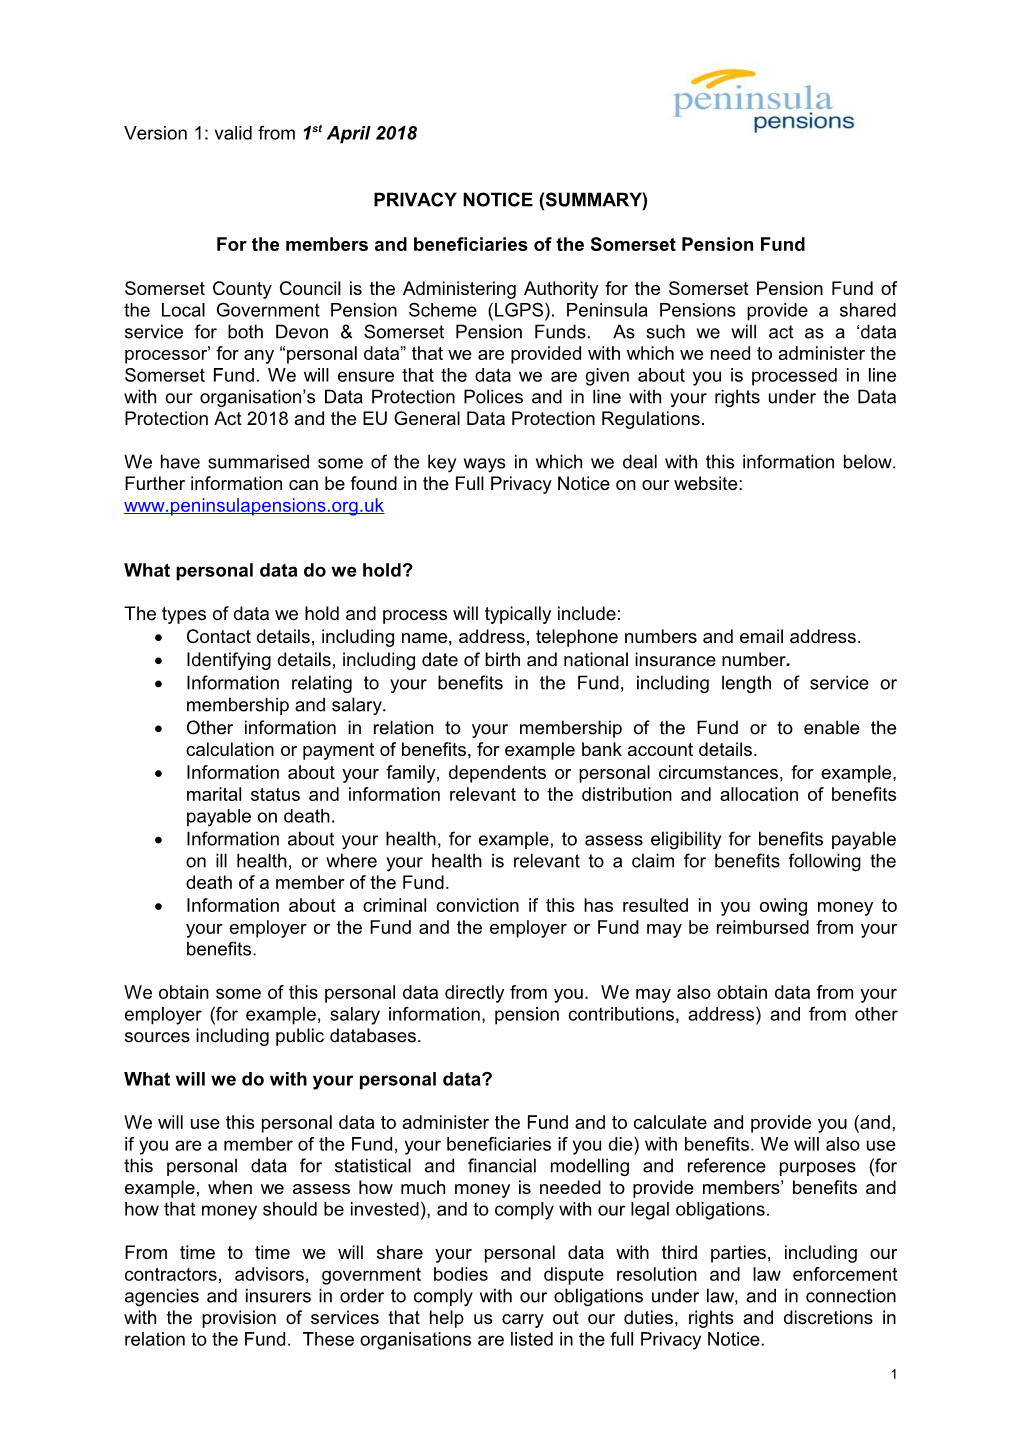 For the Members and Beneficiaries of the Somerset Pension Fund